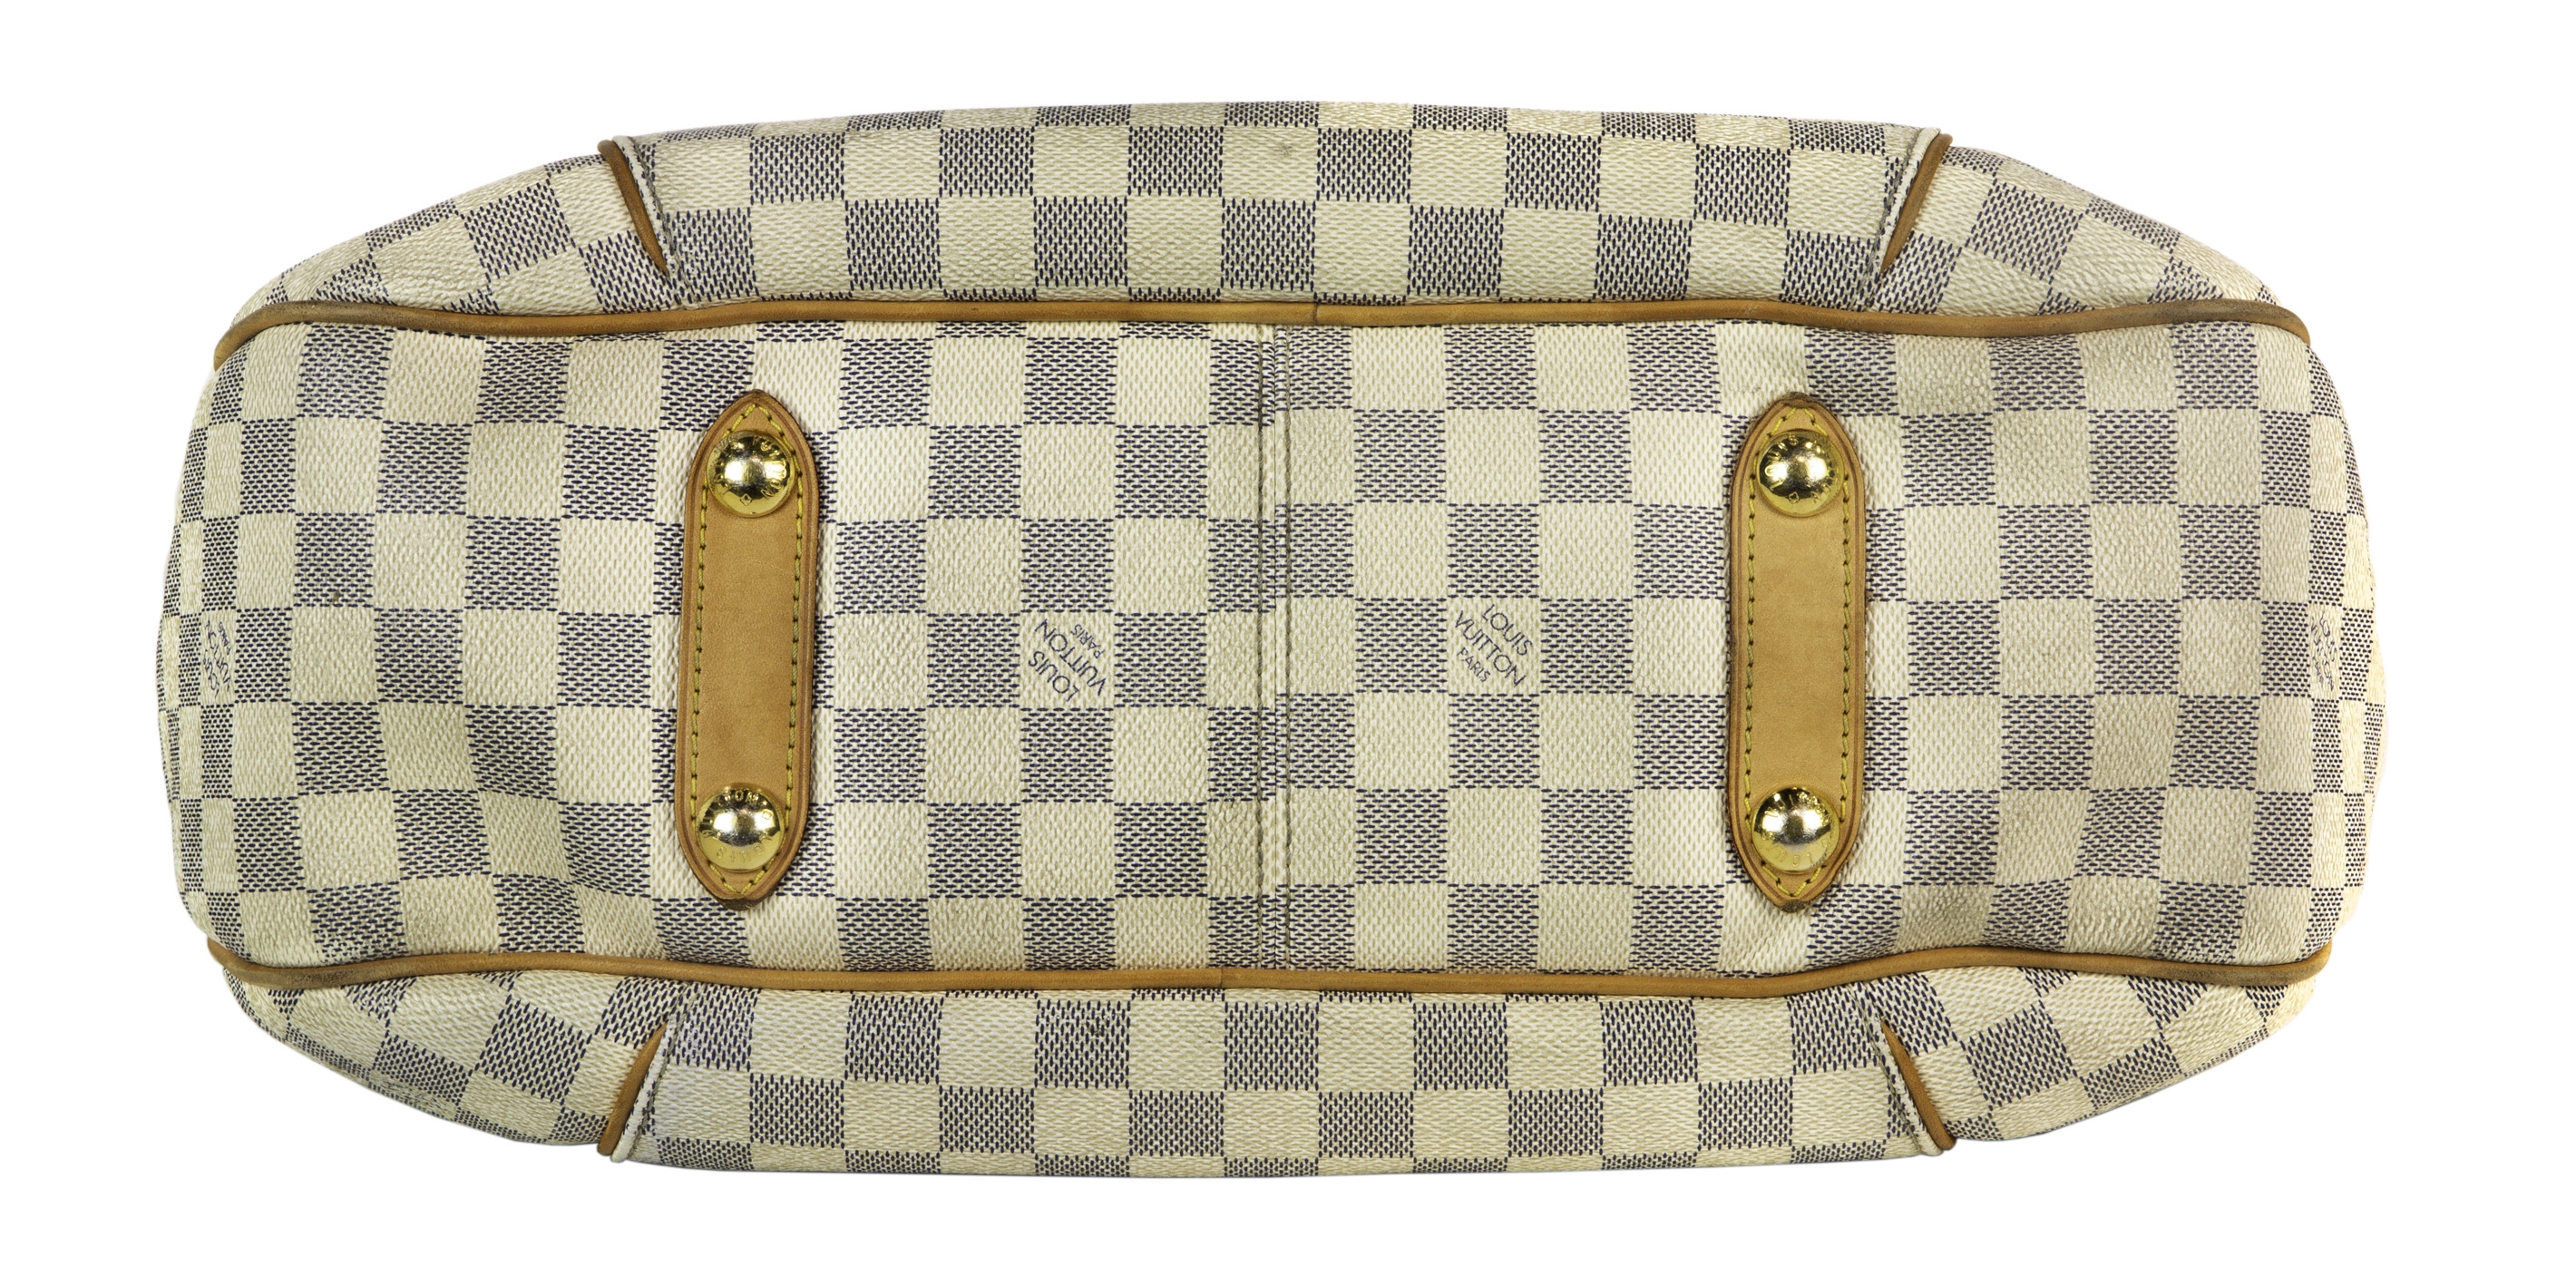 JUST IN! Louis Vuitton Damier Azur Galliera PM! Call/text us at